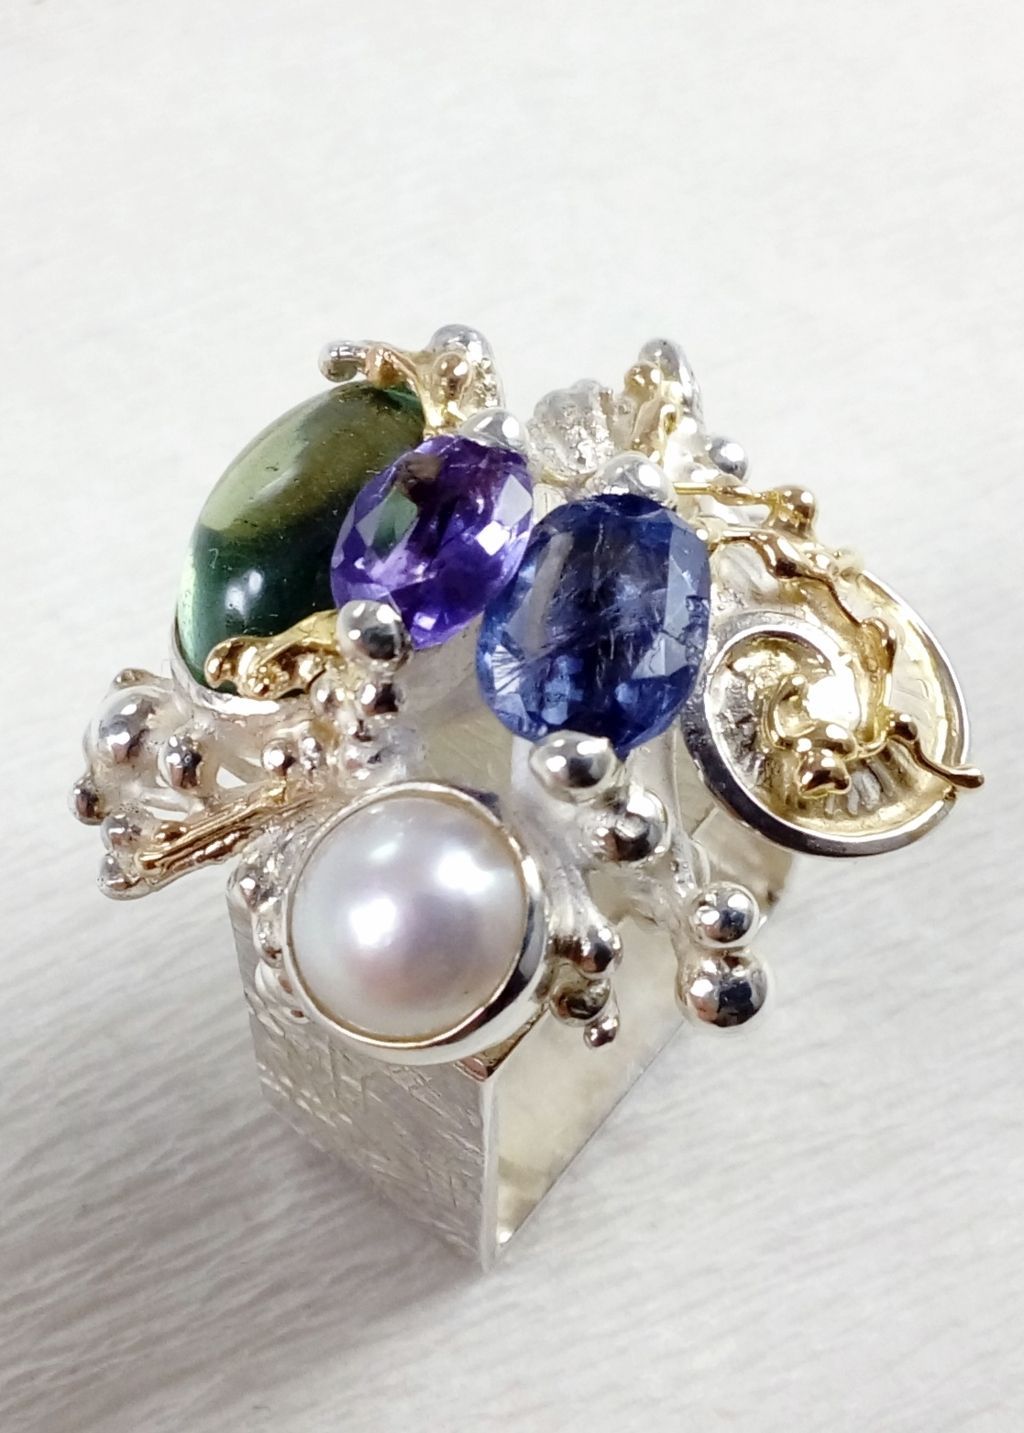 jewelry made from gold and silver, jewelry with color stones, jewelry with real pearls, gregory pyra piro square ring 4821, fine craft gallery handcrafted ring for sale, sterling silver and 14 karat gold ring, rings for women with amethyst, fluorite, iolite and pearl, one of a kind handcrafted ring, where to find auctions with fine art and designer jewellery, where to buy gregory pyra piro jewelry right now